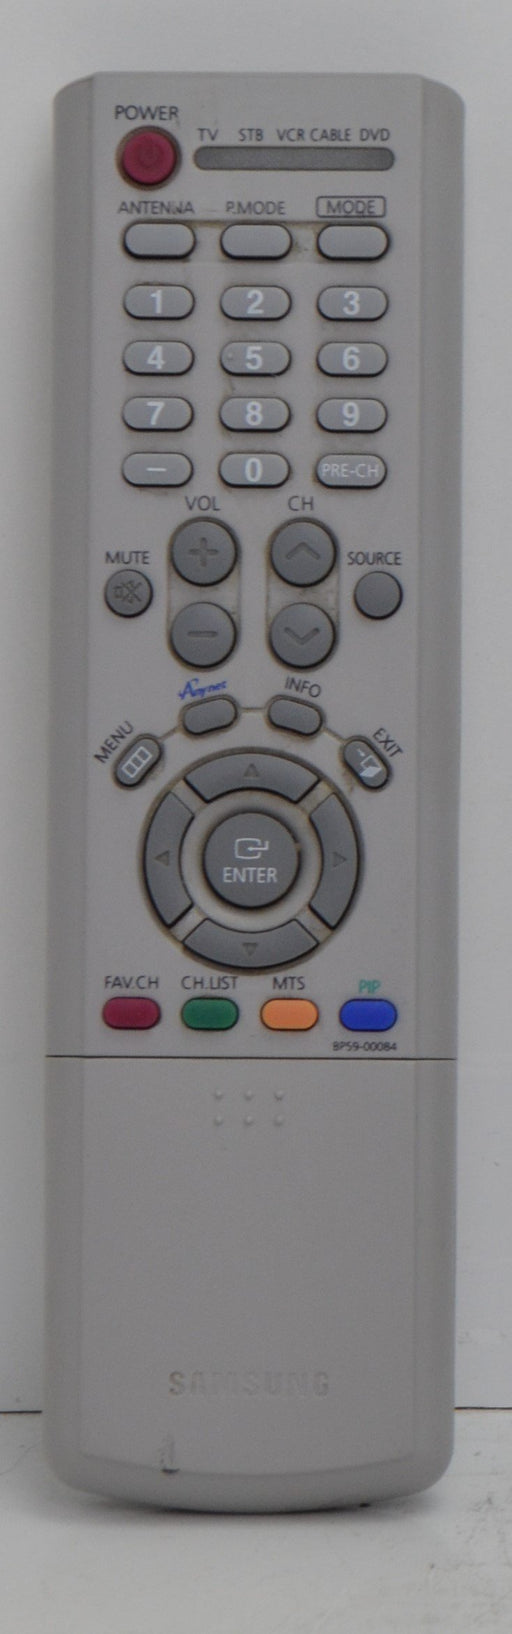 Samsung BP59-00084A TV DVD STB VCR Cable DVD Remote Control-Remote-SpenCertified-refurbished-vintage-electonics